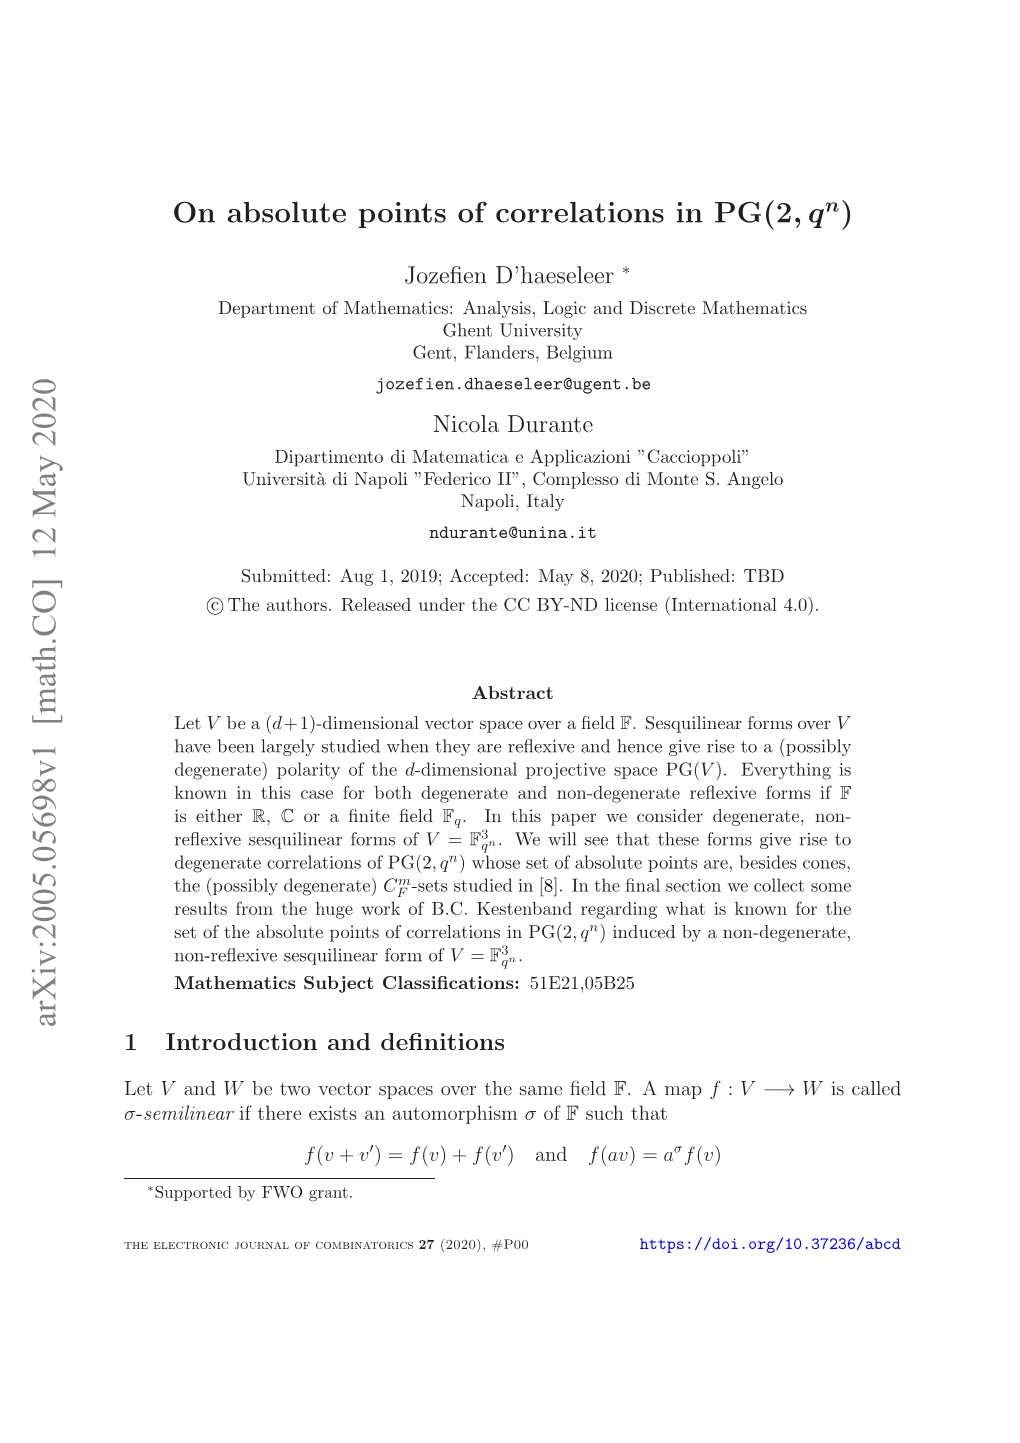 On Absolute Points of Correlations in PG $(2, Q^ N) $